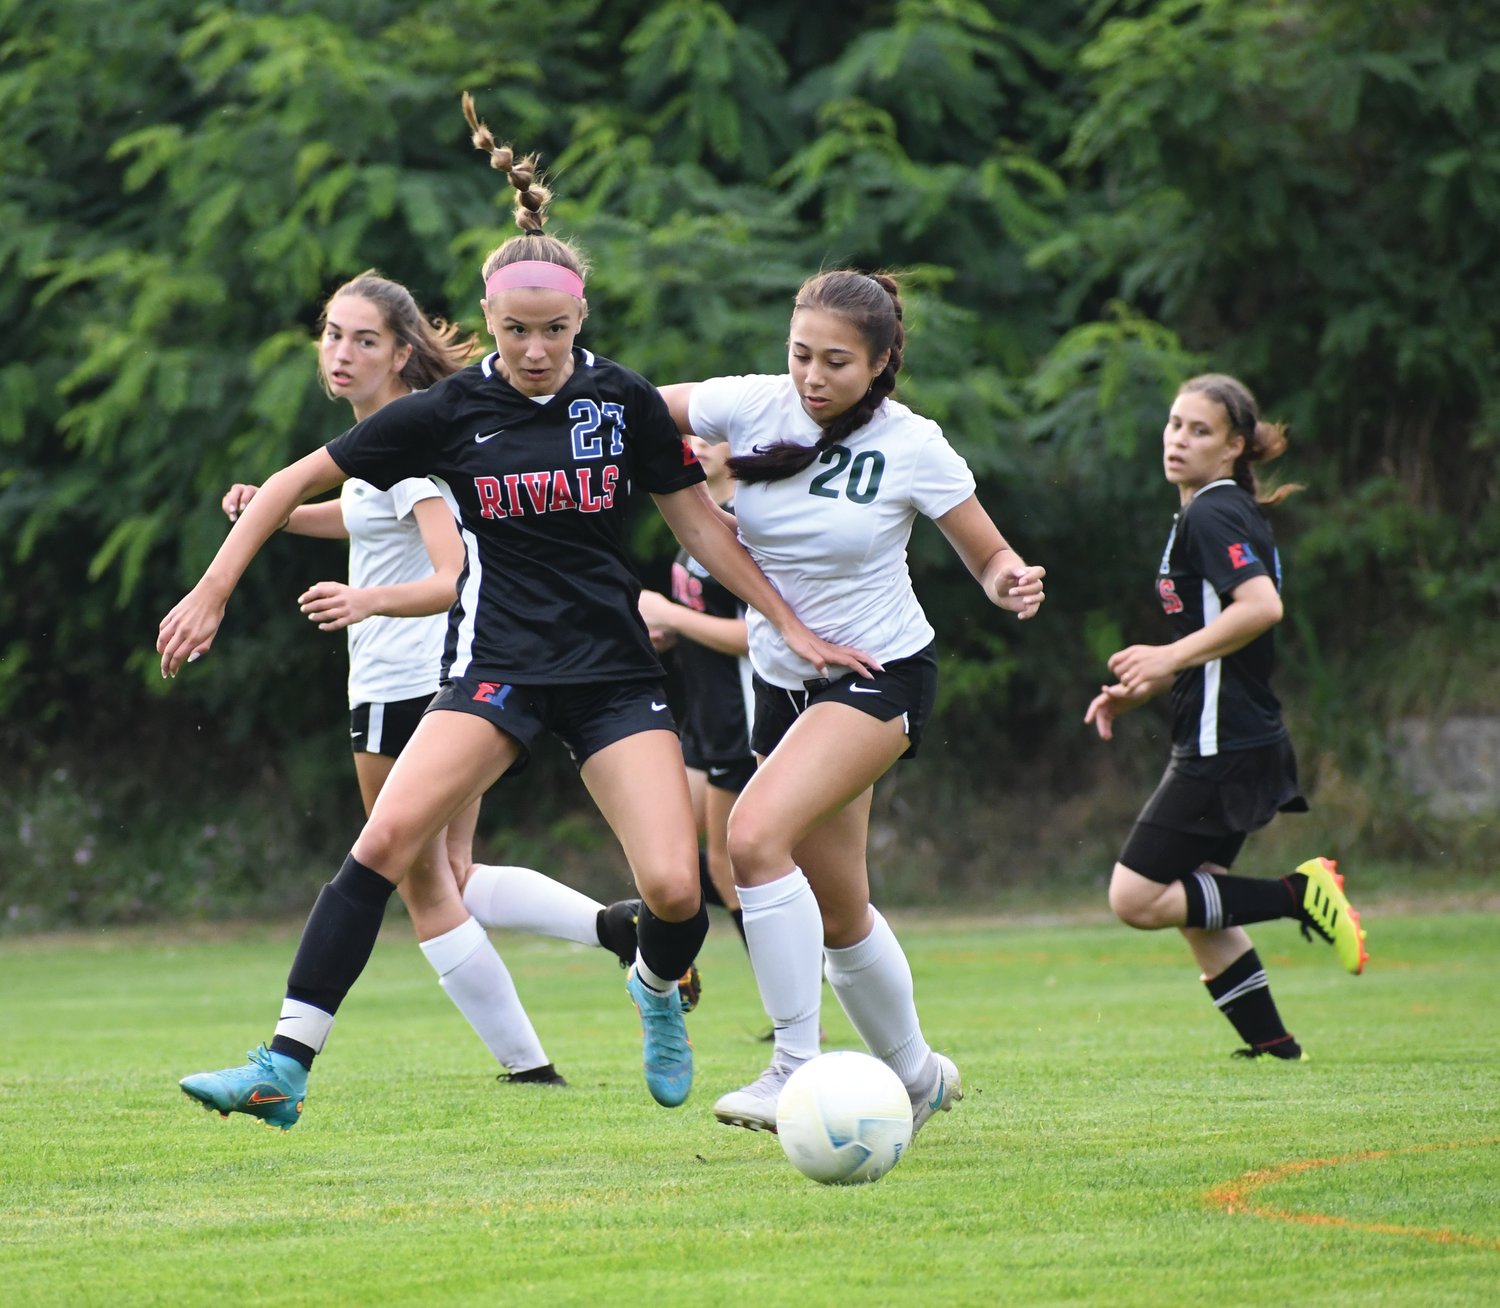 EJ midfielder Iris Mattern collects the ball before looking to loft a pass towards her teammate in the opening half of play.